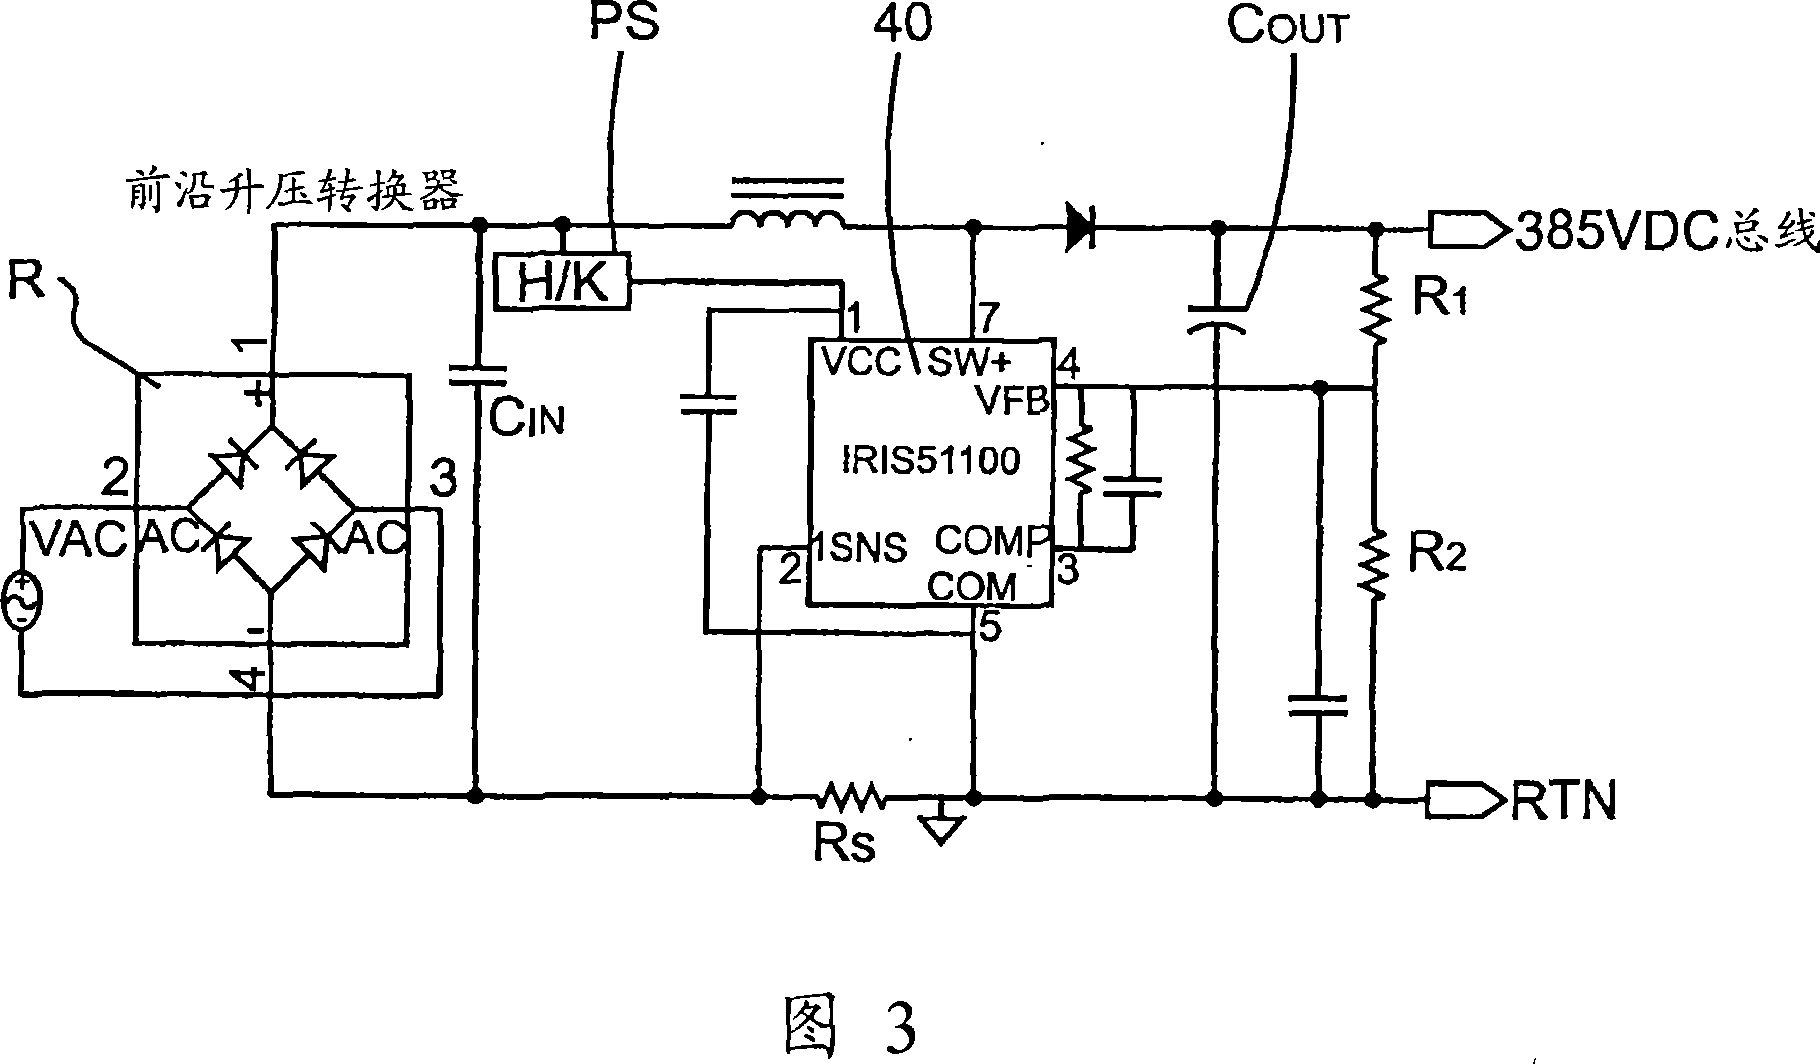 One cycle PFC boost converter IC with inrush limiting, fan control and housekeeping supply control